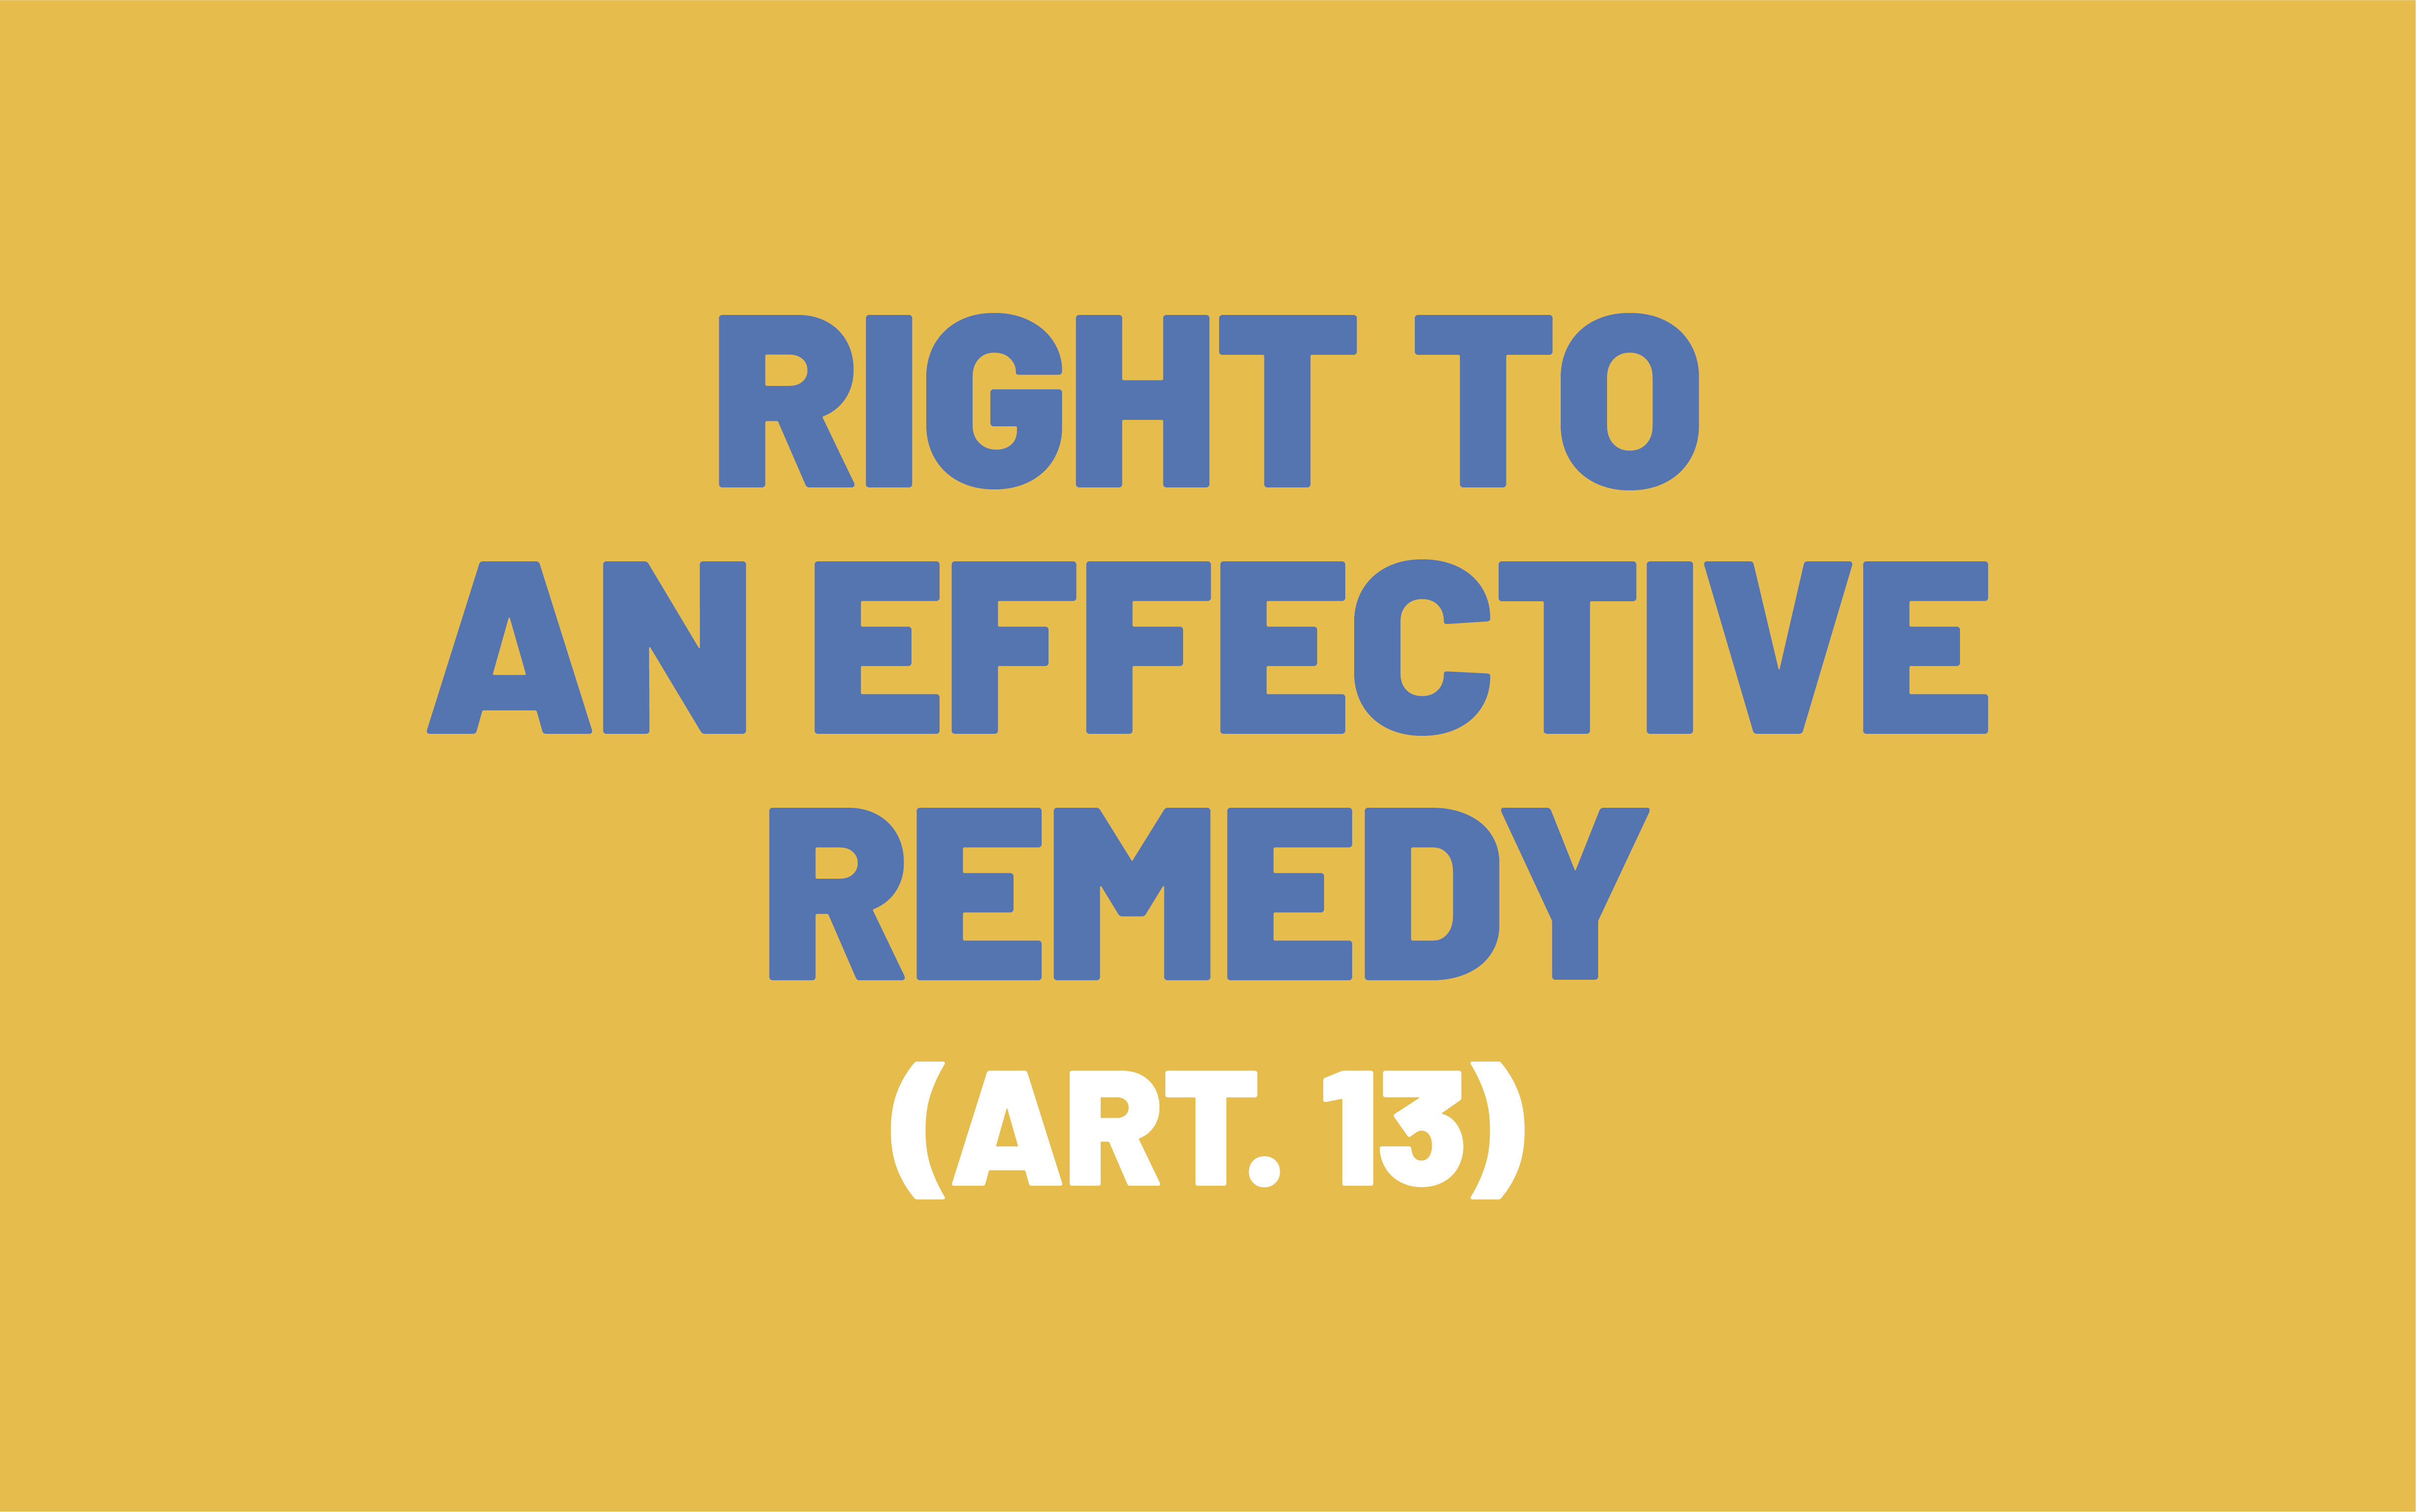 The picture consists of the wording of Article 13 of the European Convention on Human Rights, which is called the right to an effective remedy.  